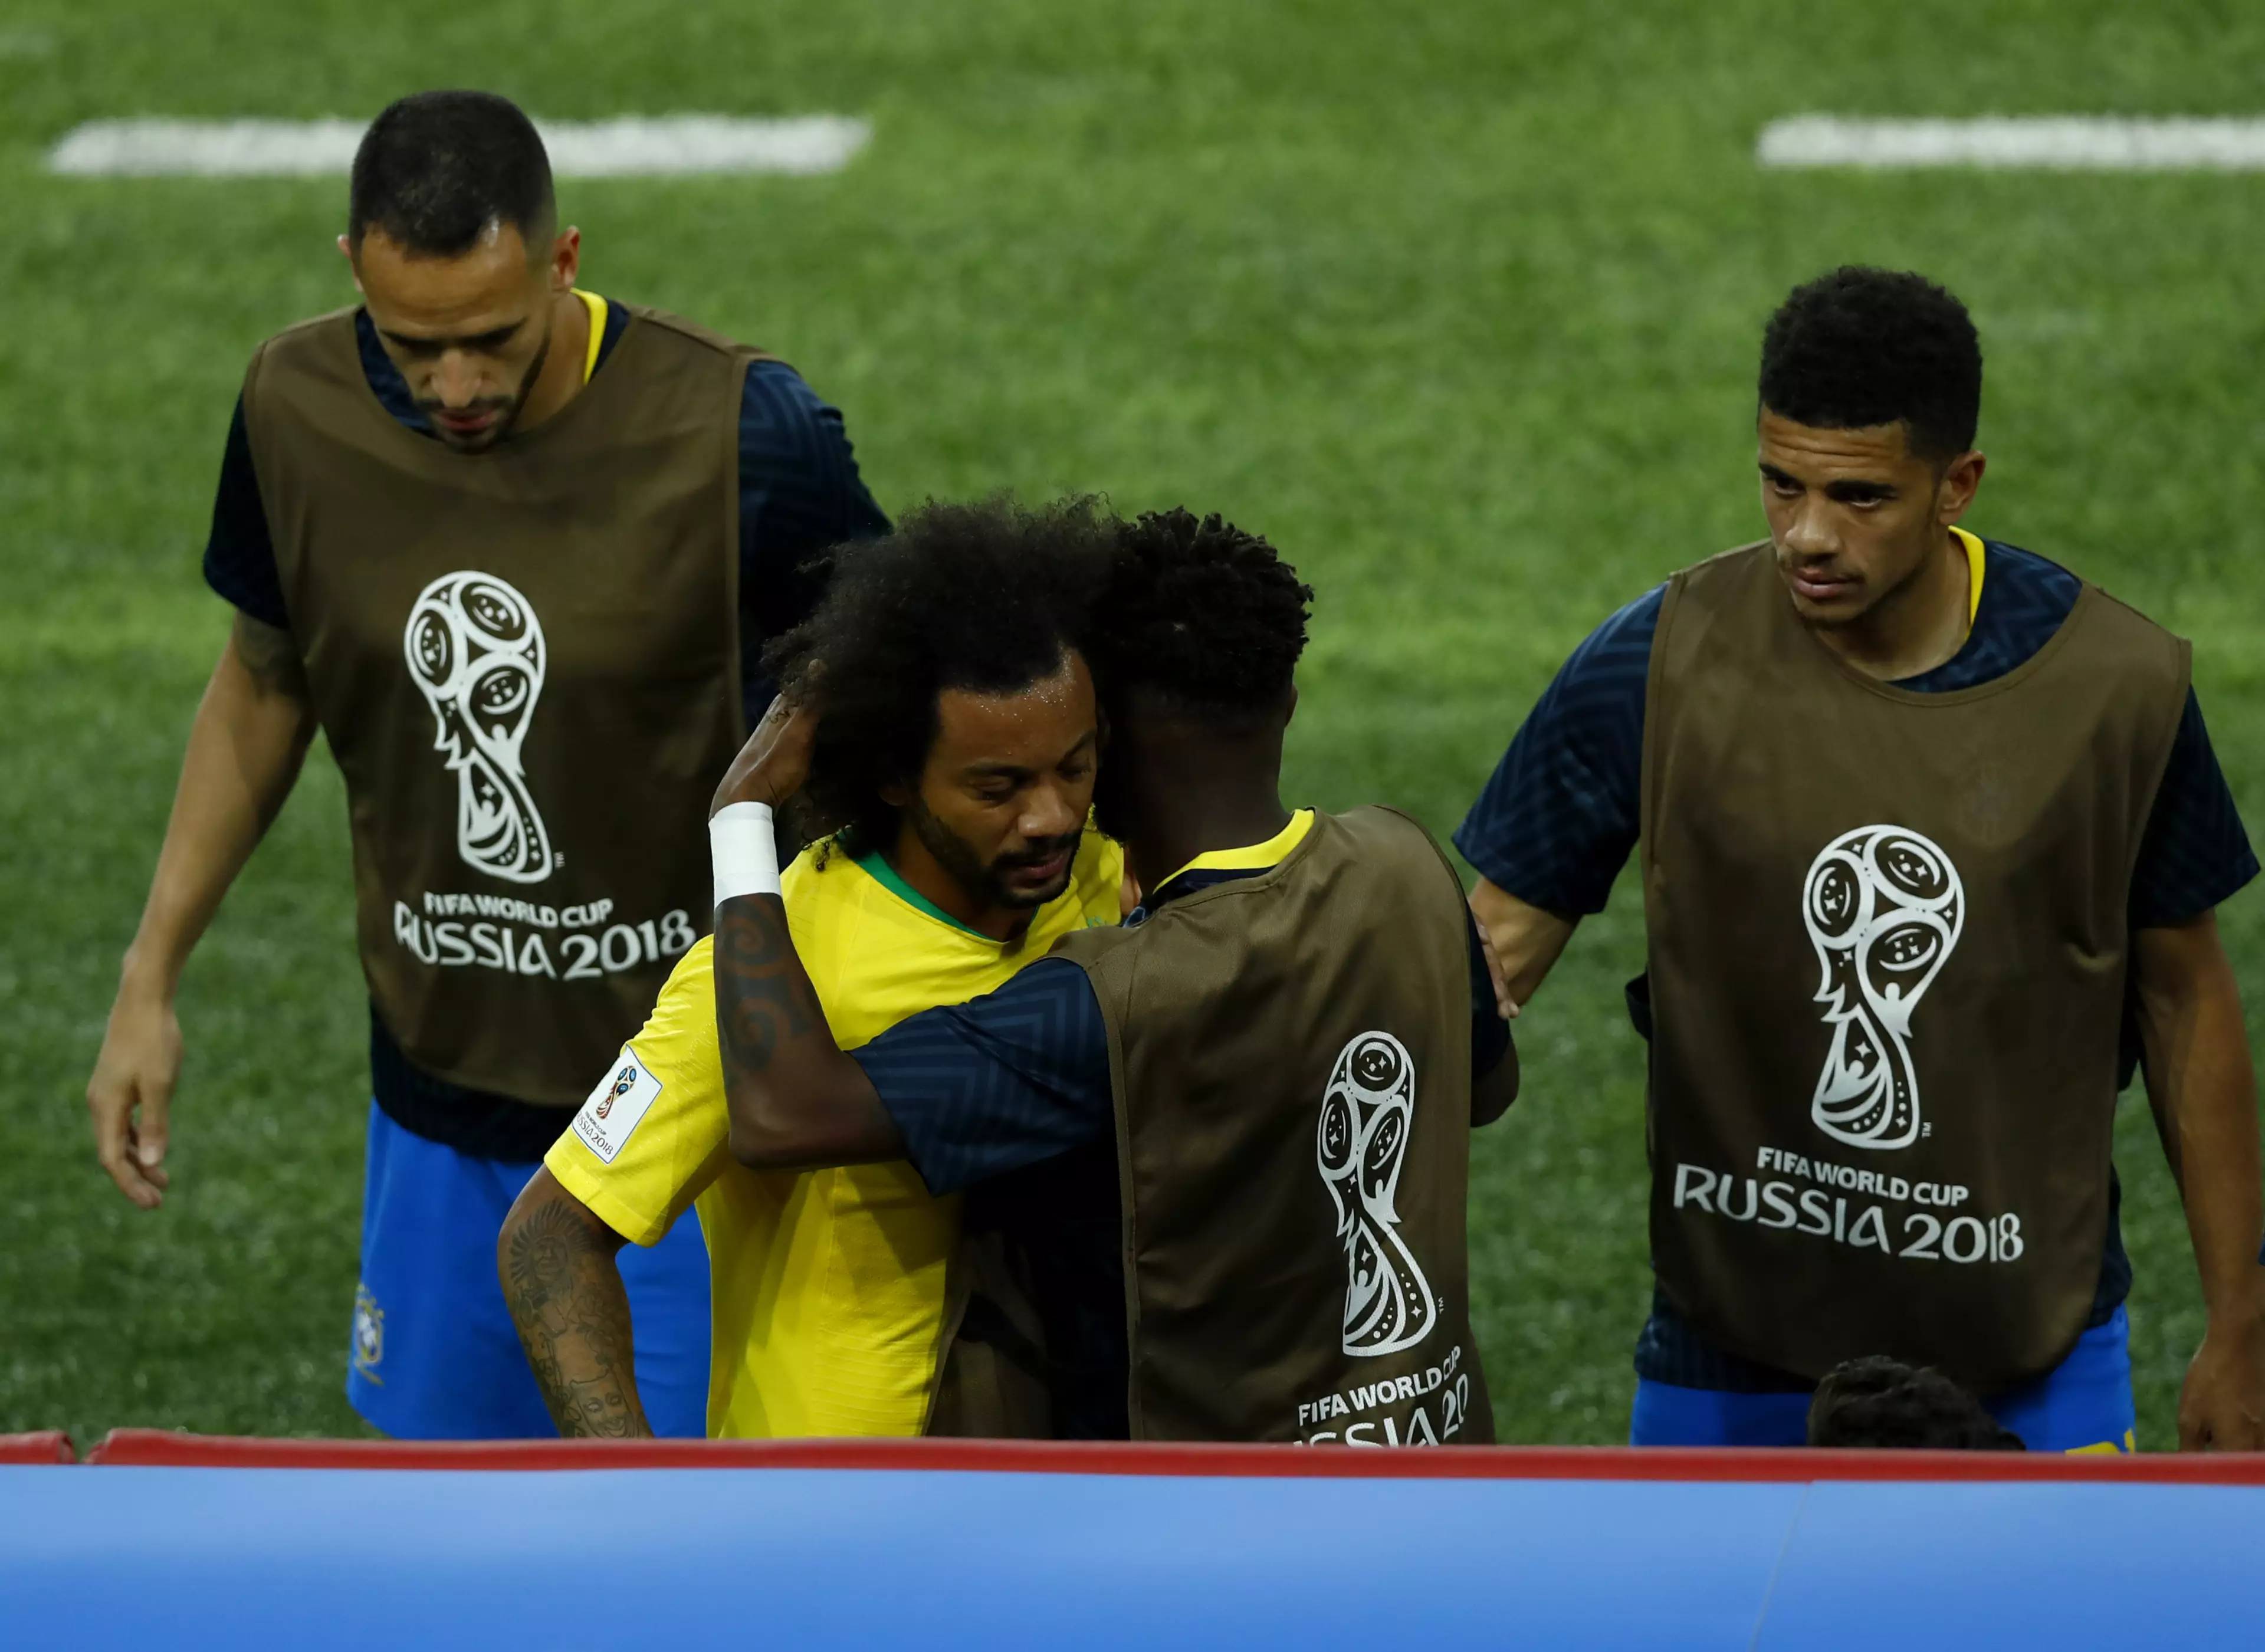 Marcelo consoled by his teammates. Image: PA